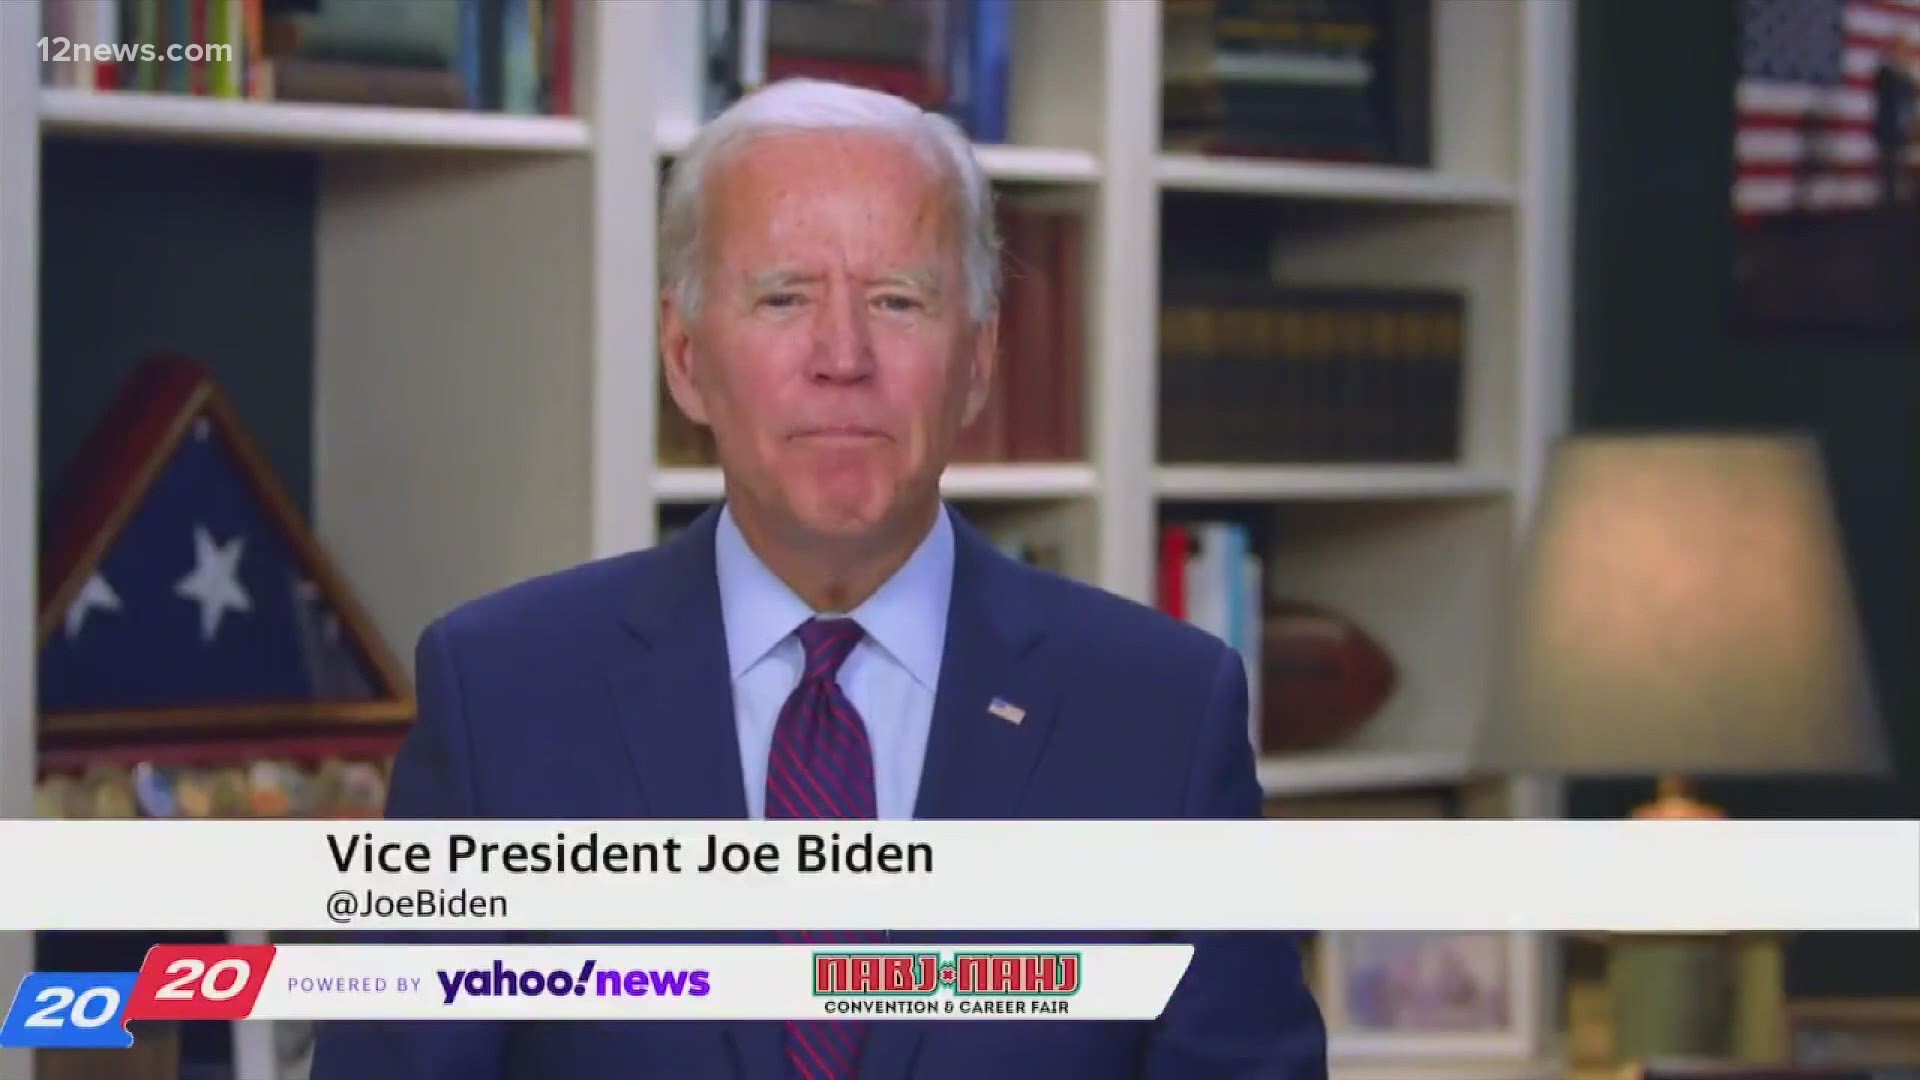 Biden's immigration plan was leaked to reporters. There's a lot of unknowns but the main push is for a path to citizenship. No mentions of border security.